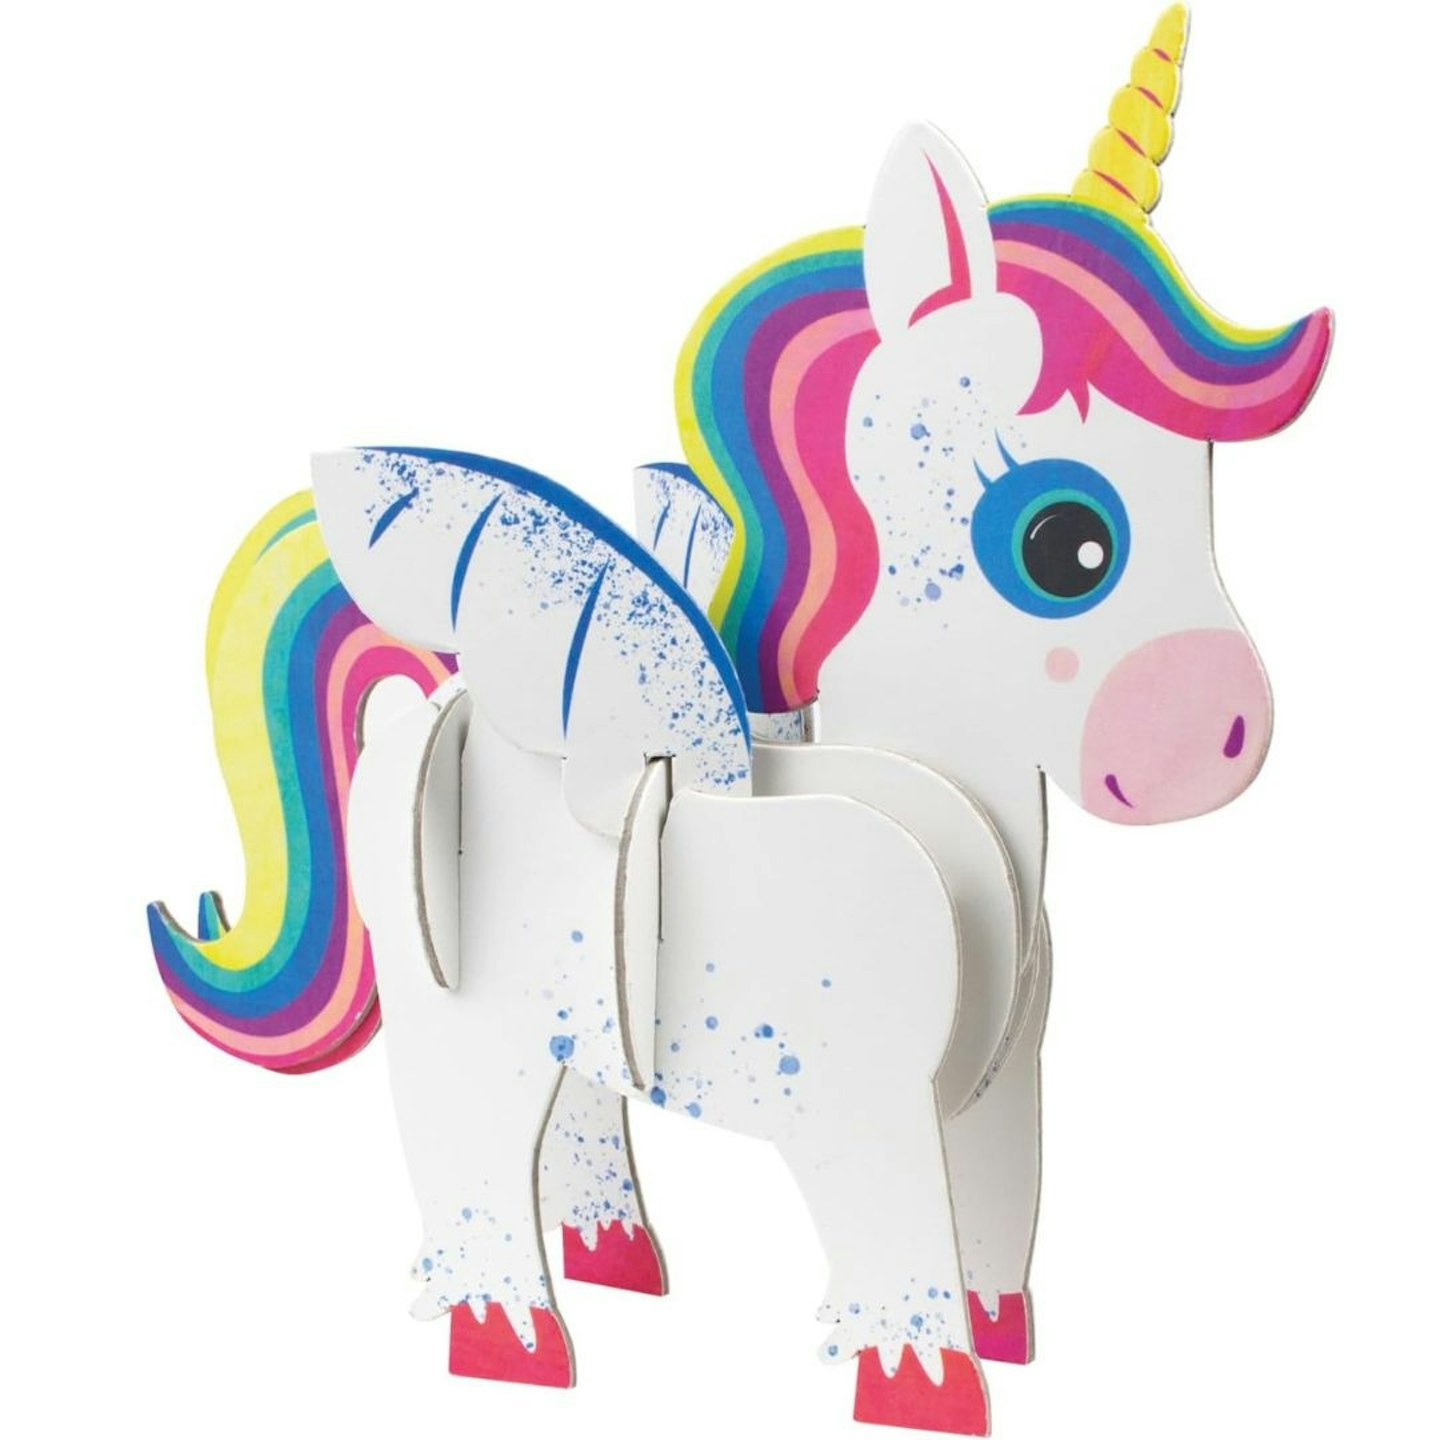 Build Your Own Magical Unicorn